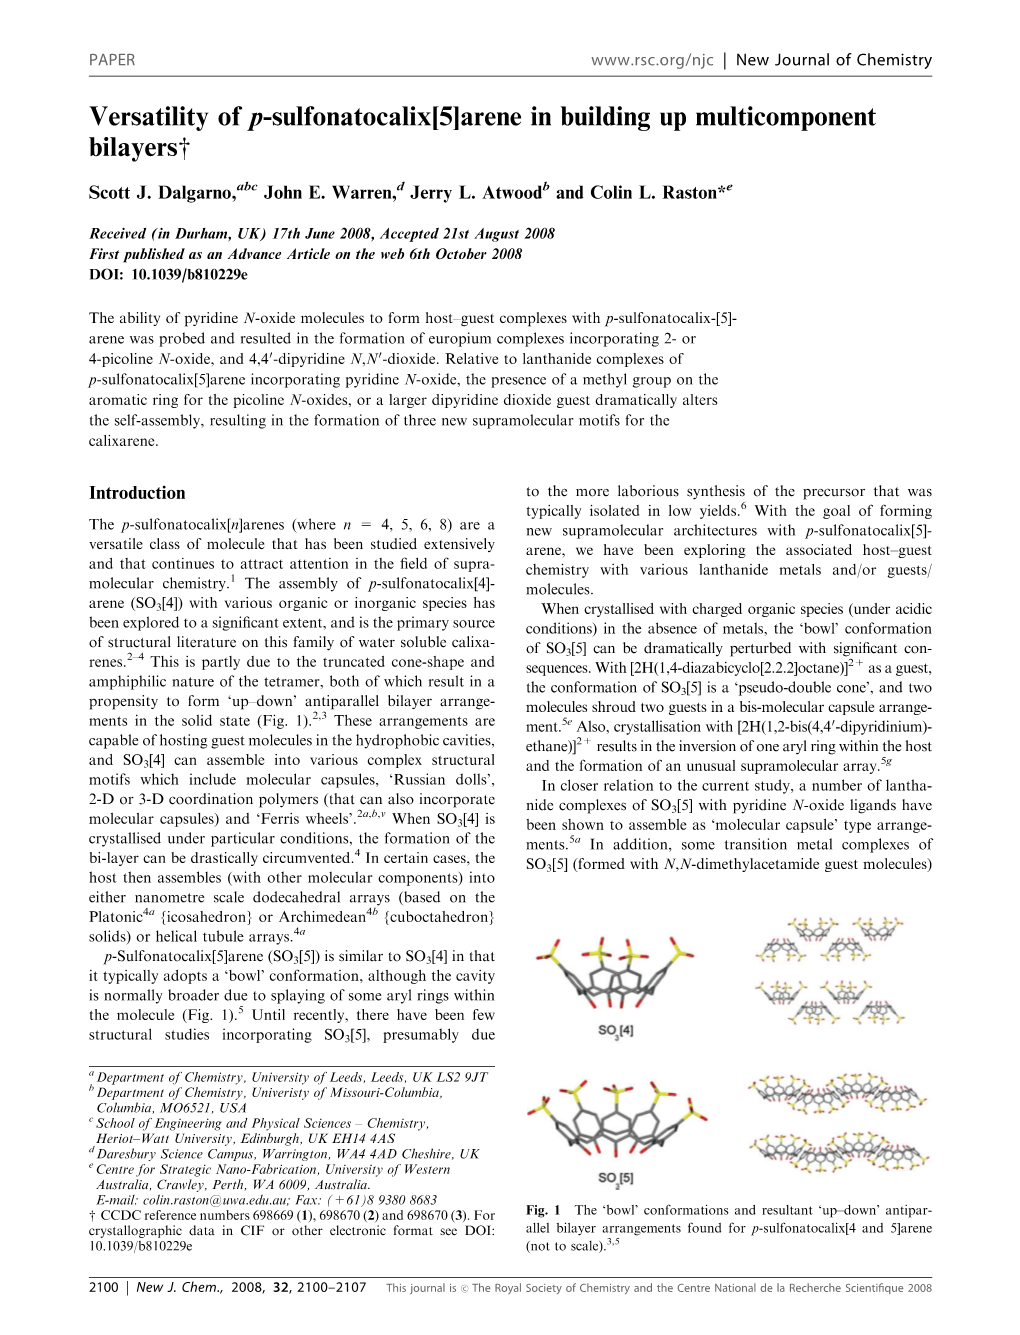 Versatility of P-Sulfonatocalix[5]Arene in Building up Multicomponent Bilayersw